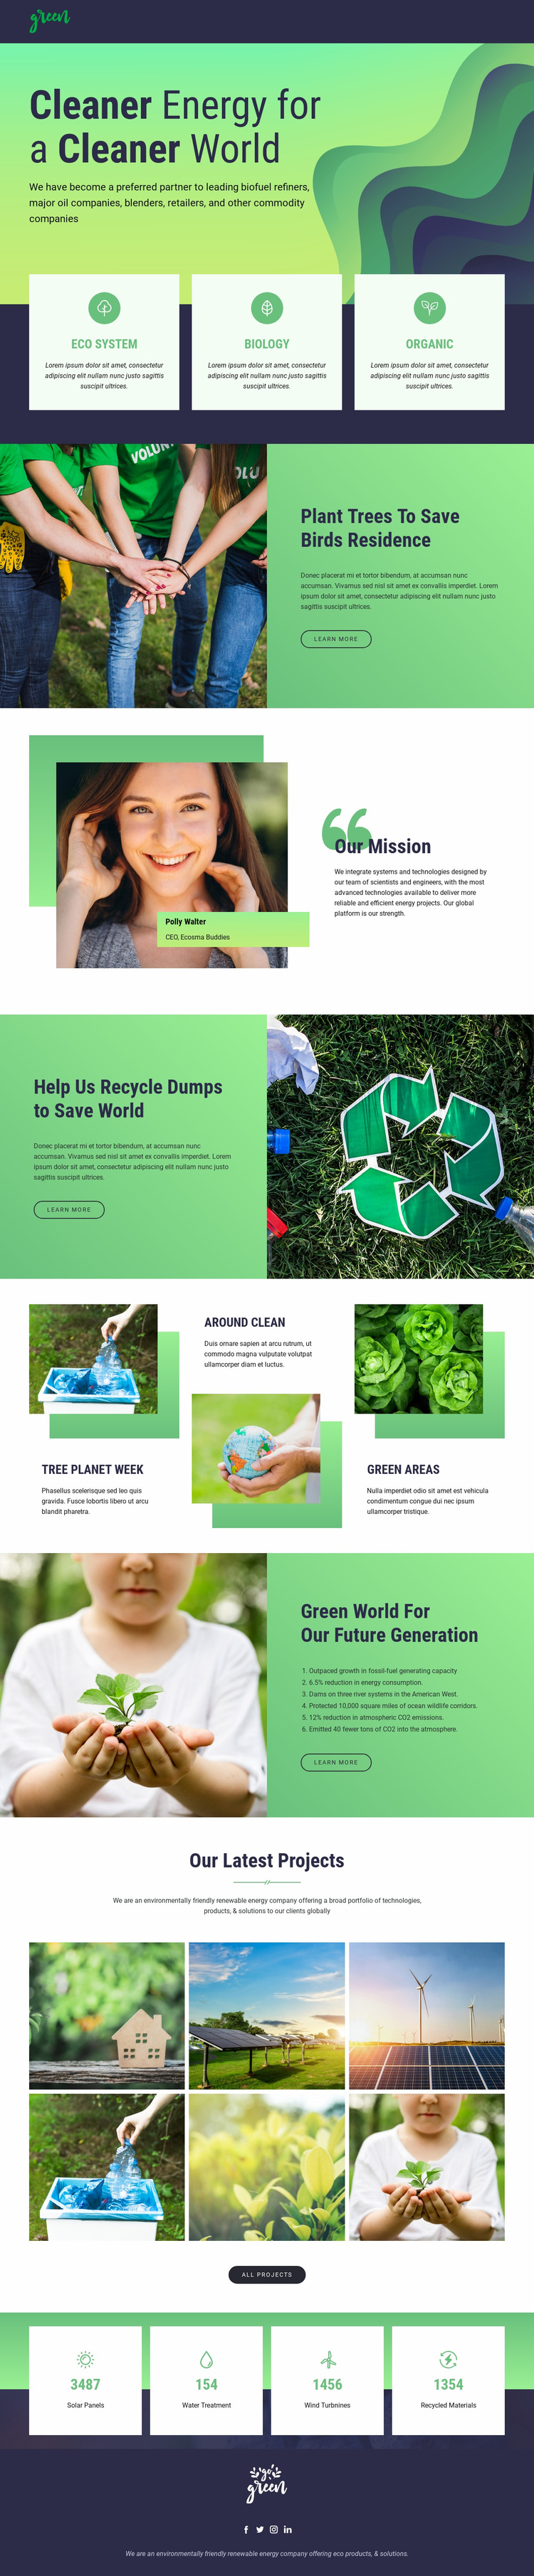 Clean energy to save nature Website Design